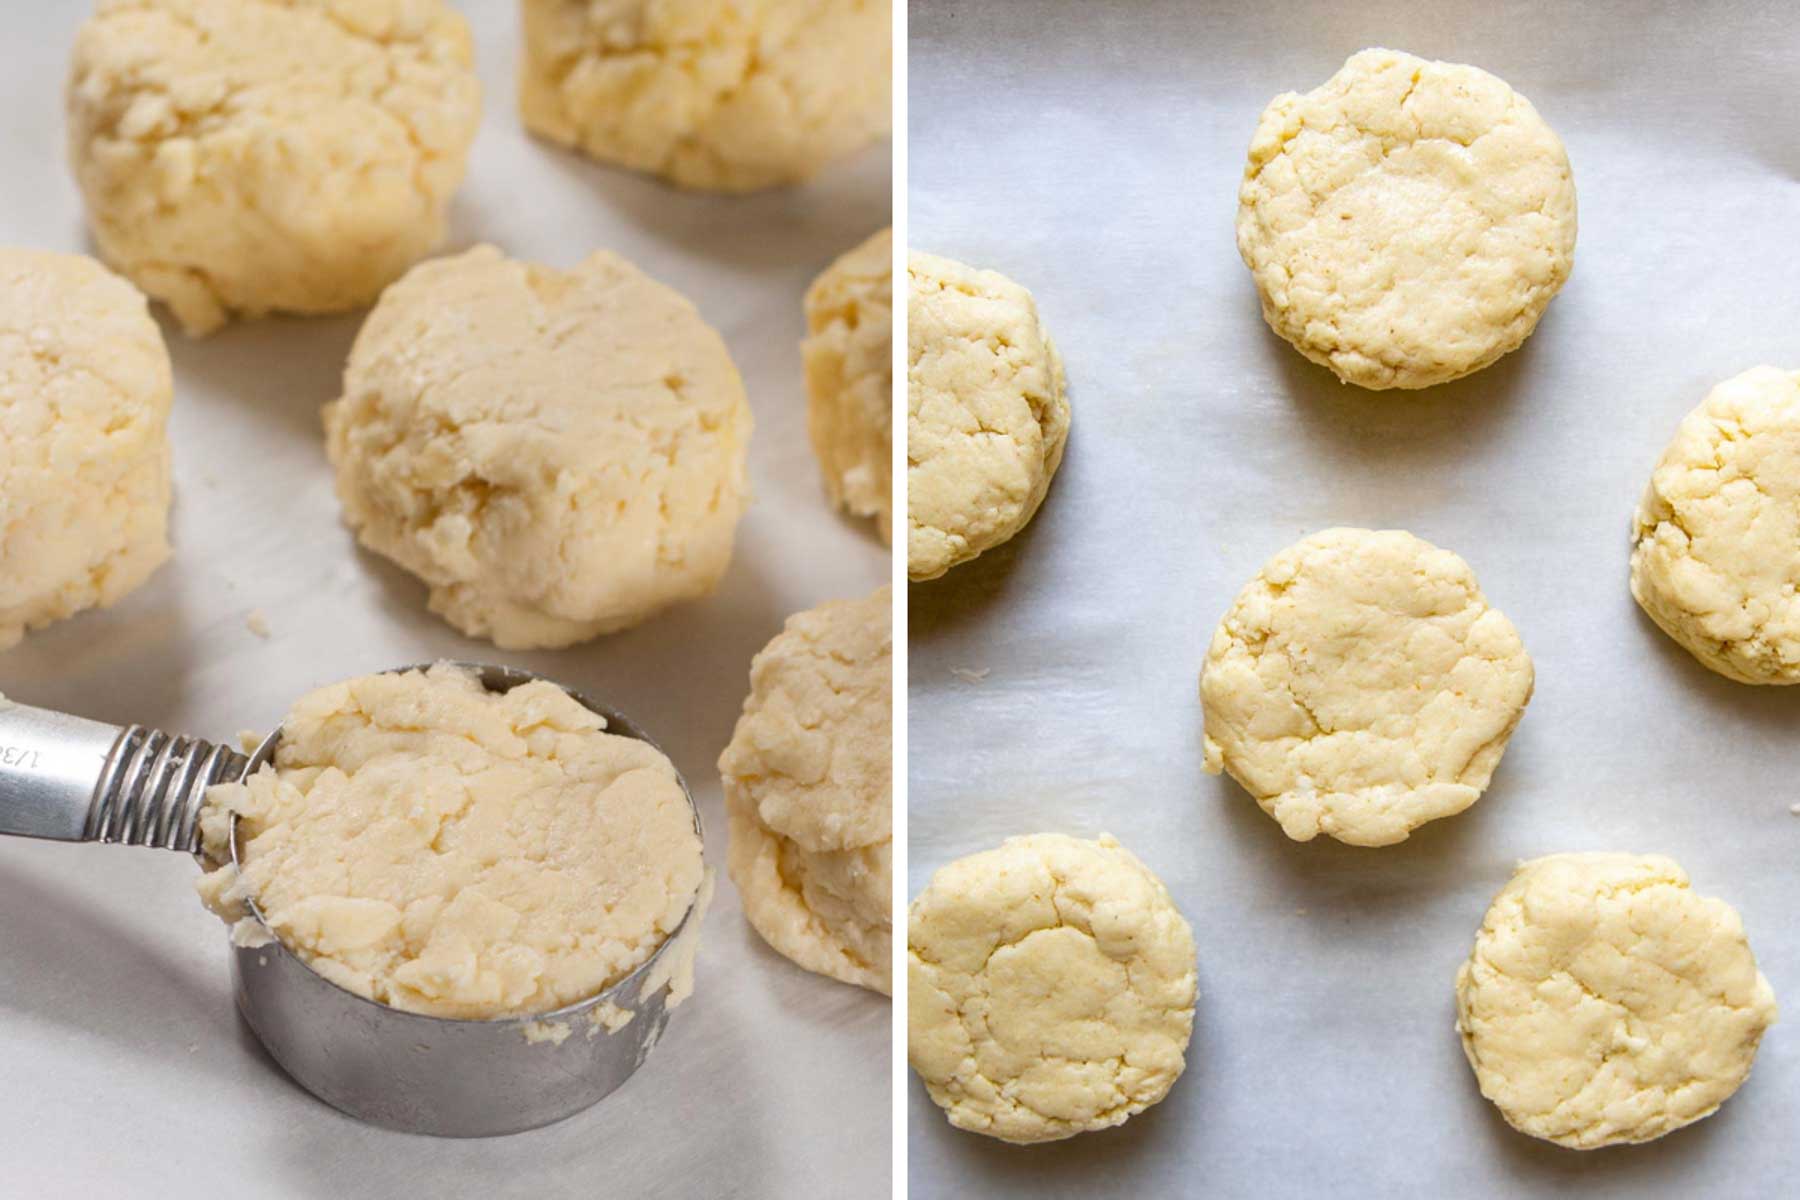 images showing how to make gluten-free biscuits